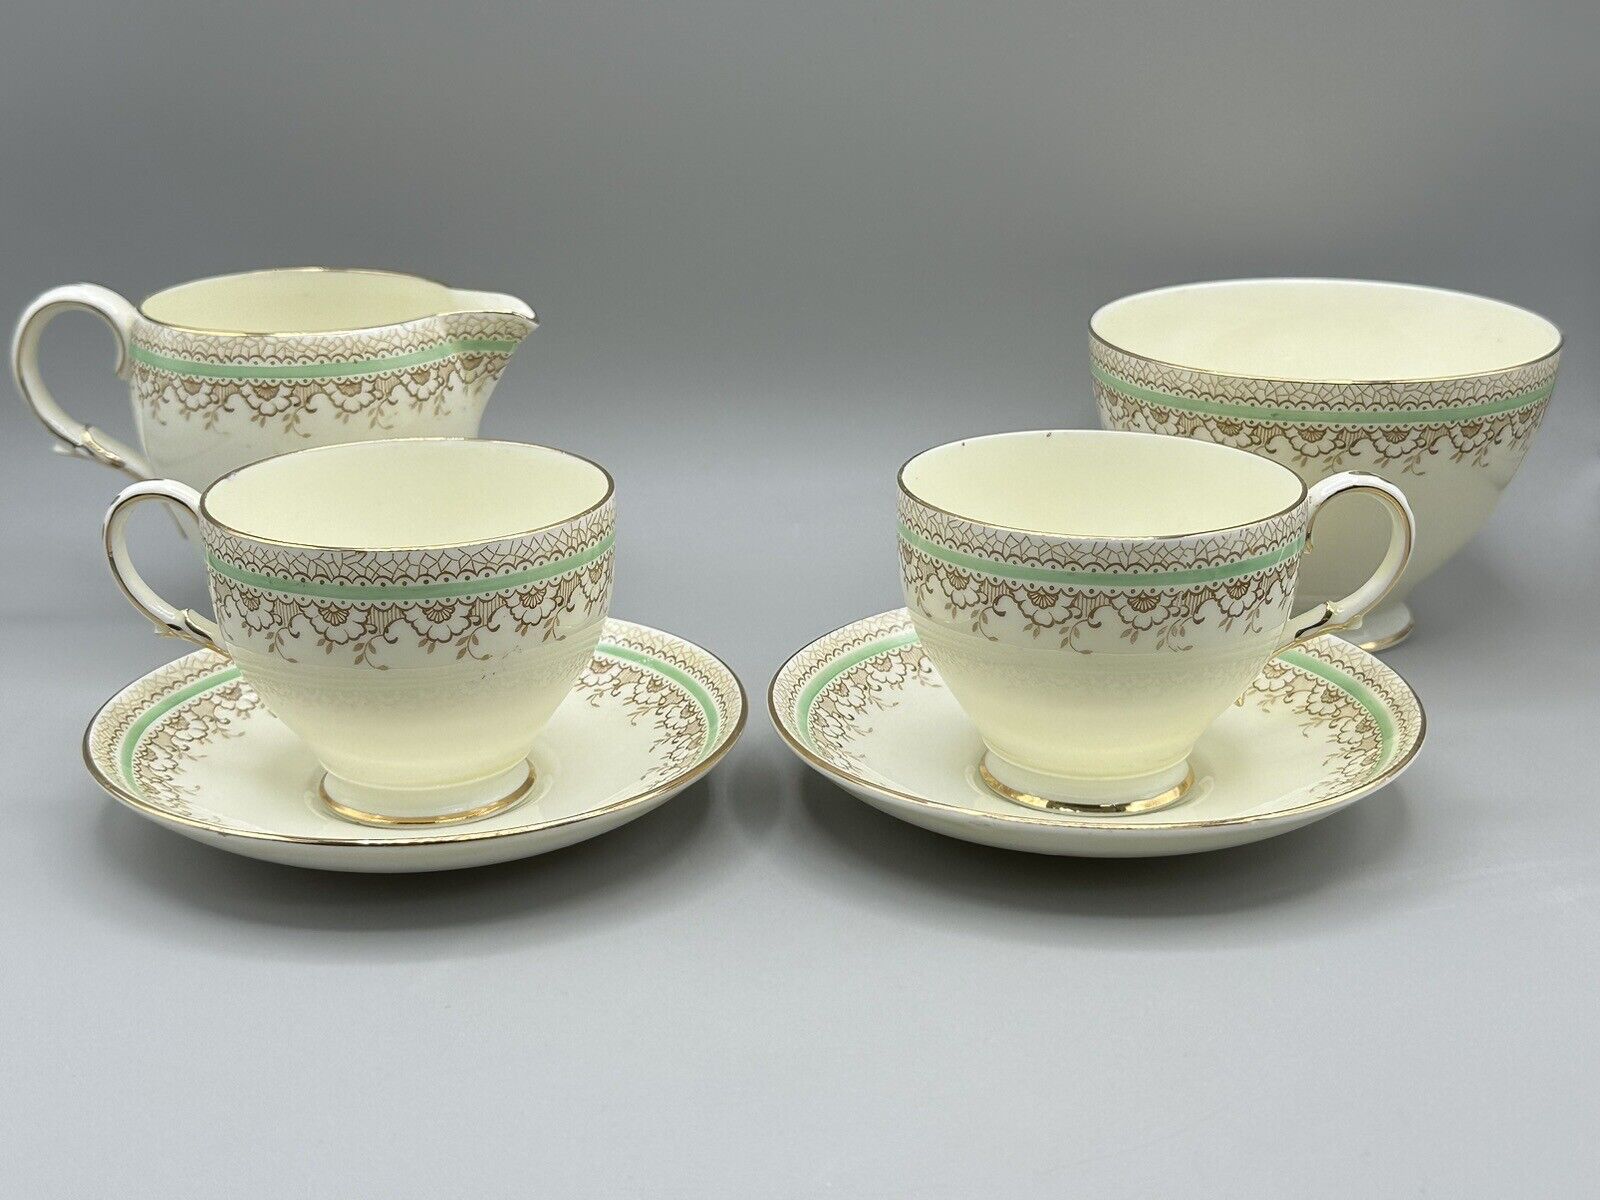 Vintage Paragon By Appointment Mint Green Teacup Sugar Bowl Creamer & Plates 